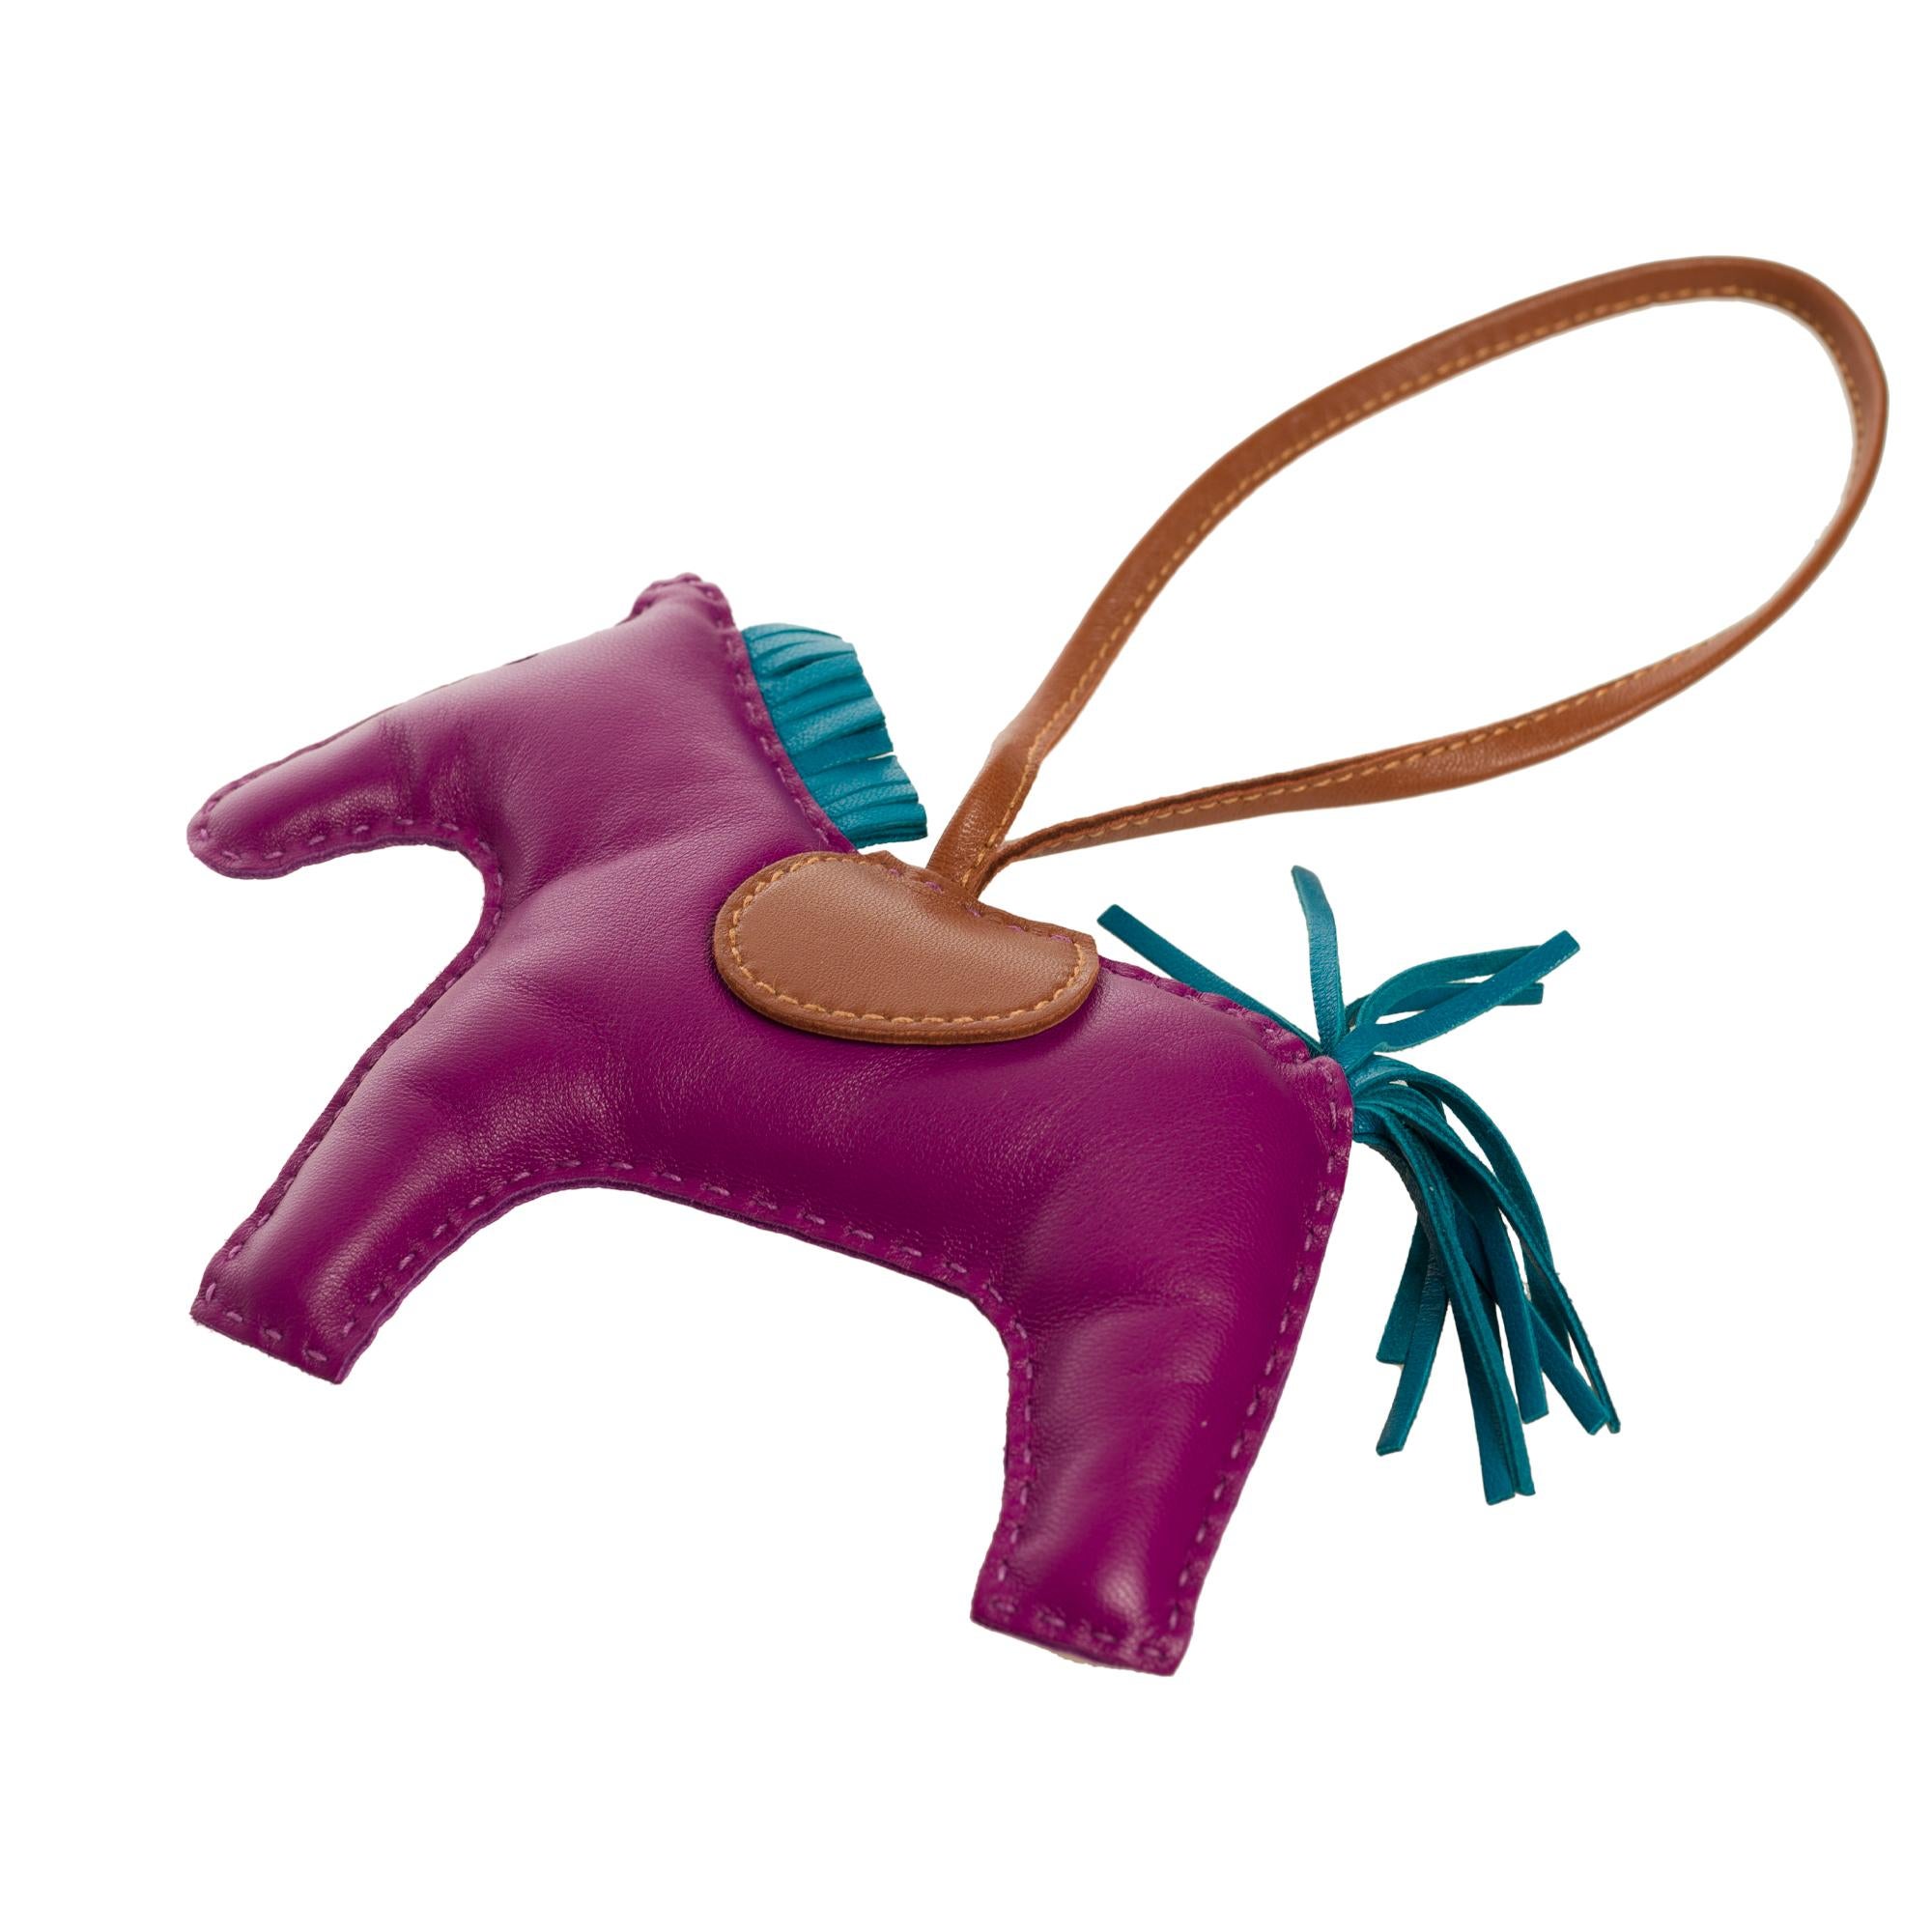 Women's Amazing Hermès Rodeo bag Charm in purple, brown and blue leather